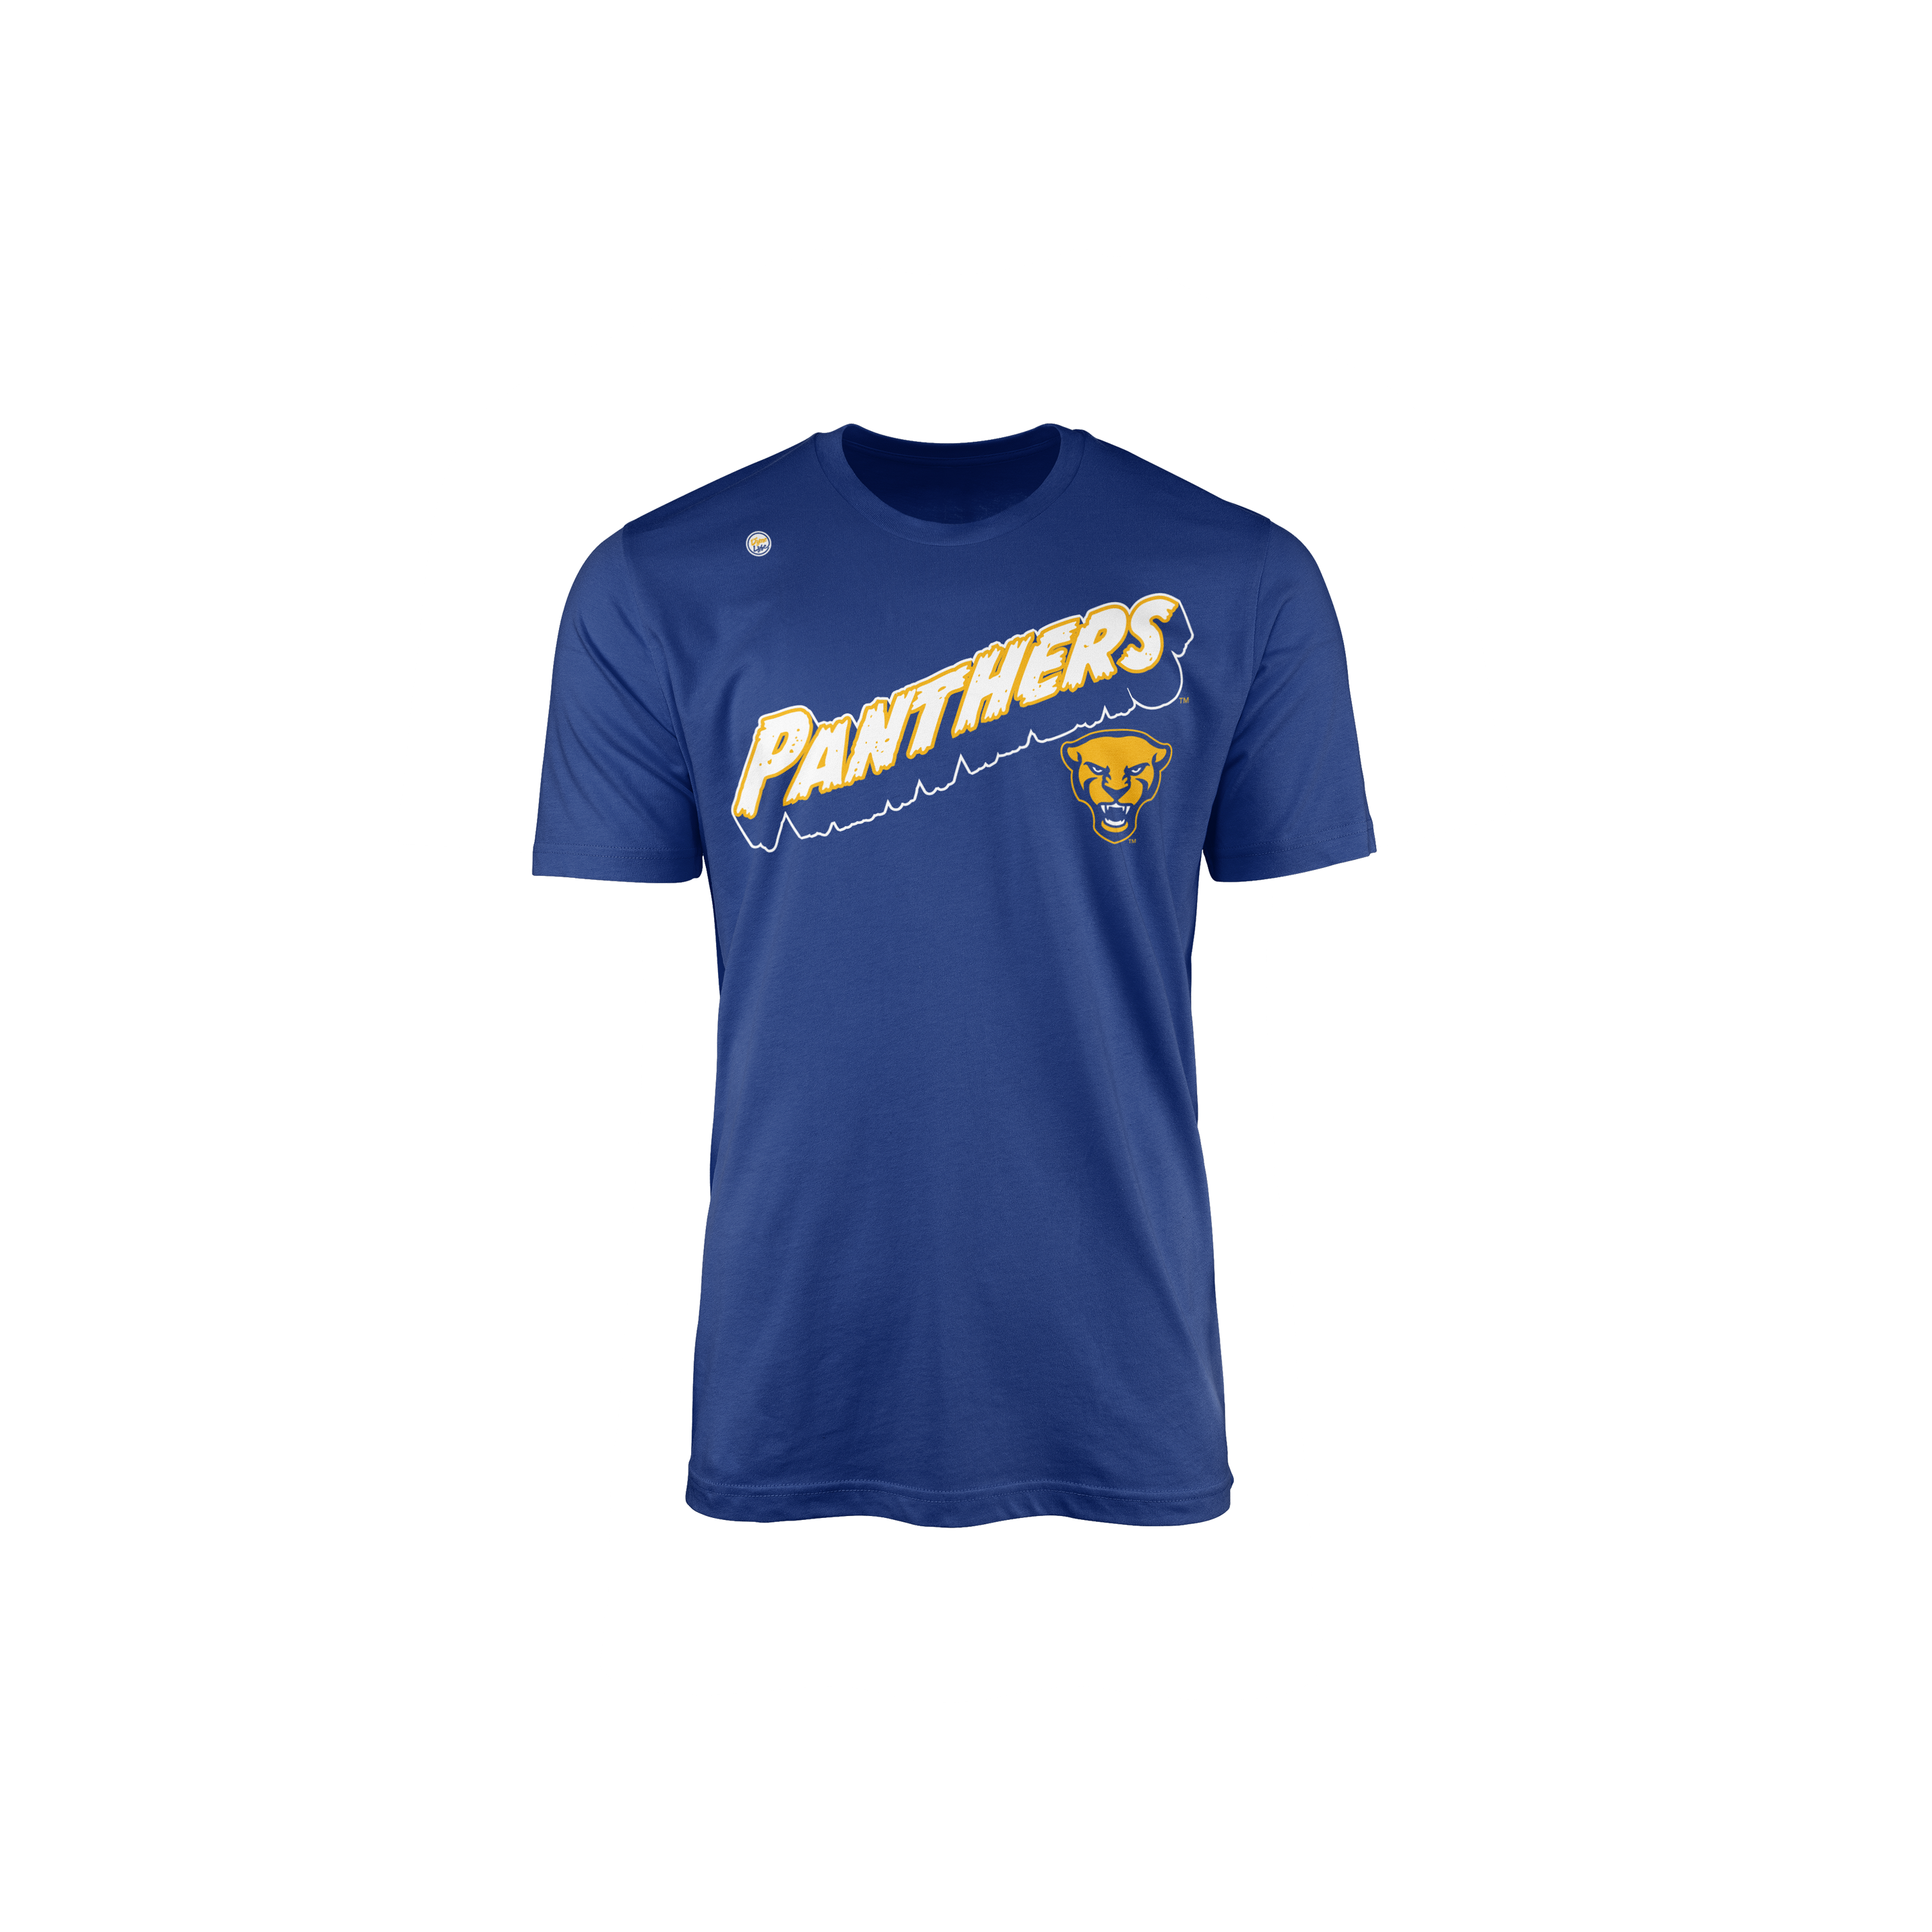 Pittsburgh Panthers Youth Tee